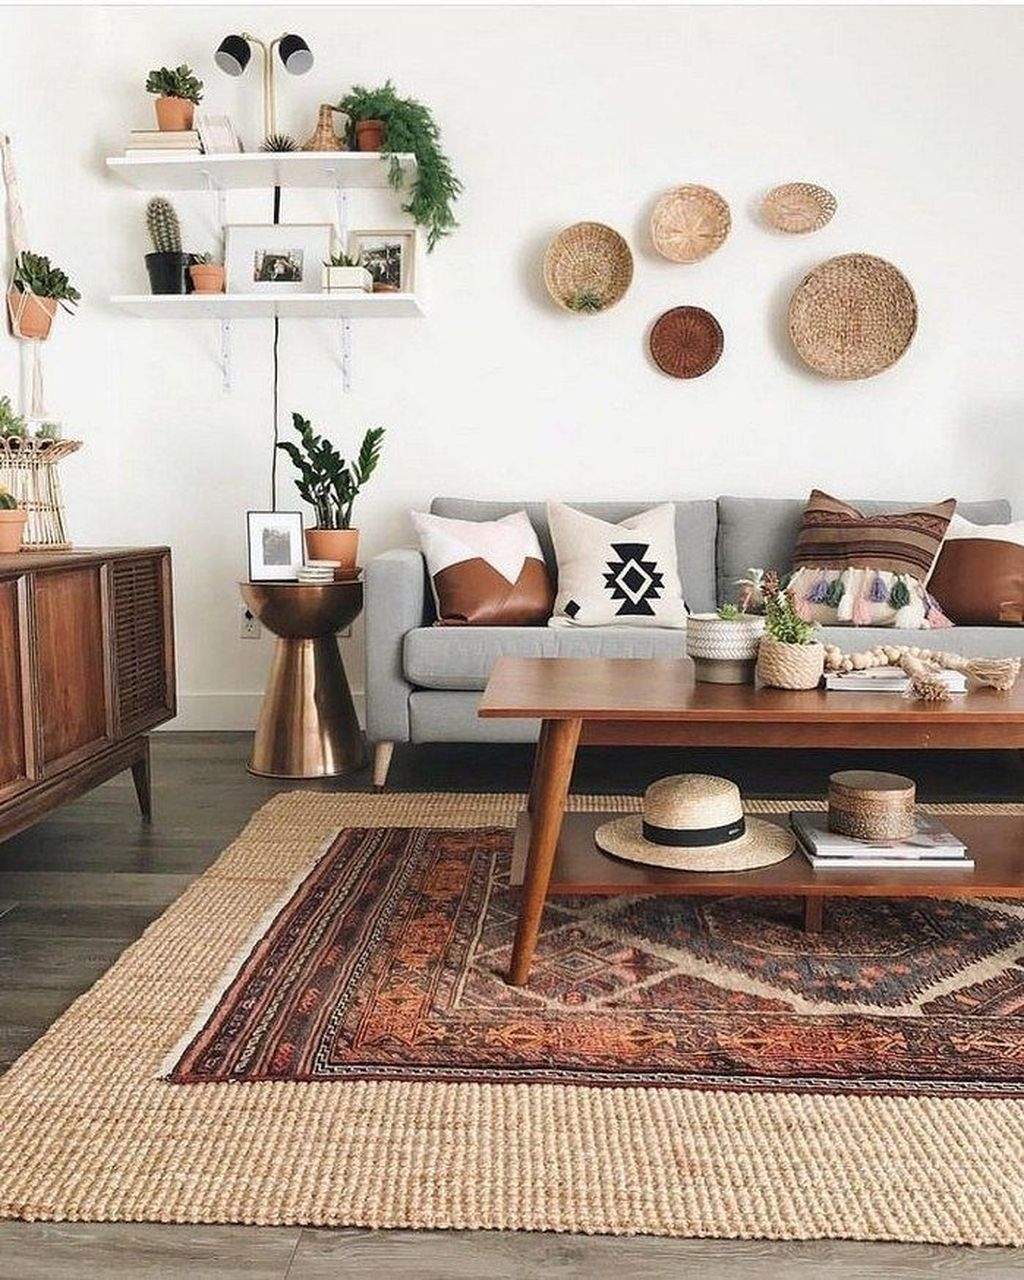 Rustic Living Room Decoration Ideas With Bohemian Style 02